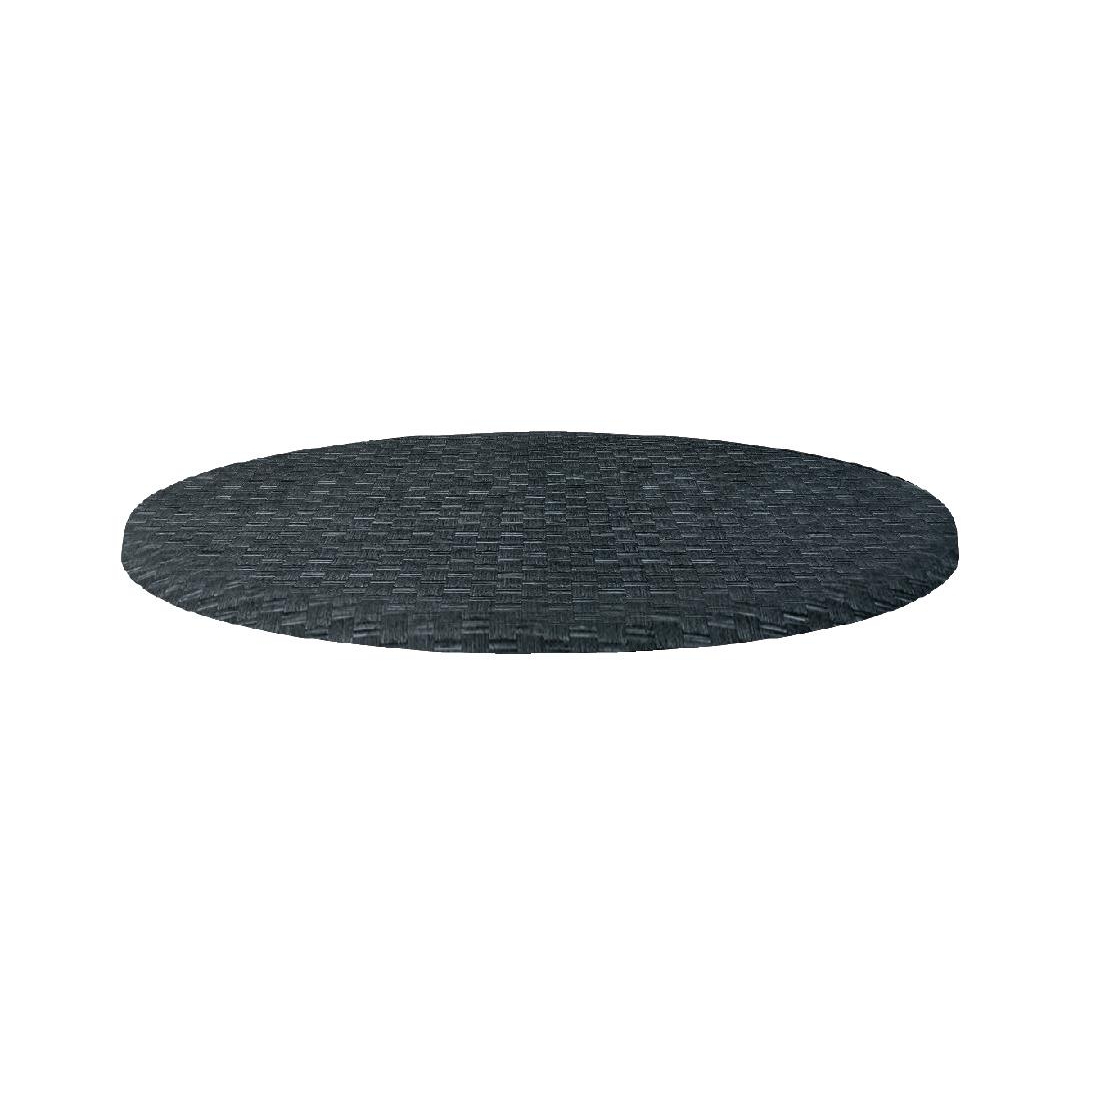 Plateau de table rond Werzalit rotin anthracite 600mm